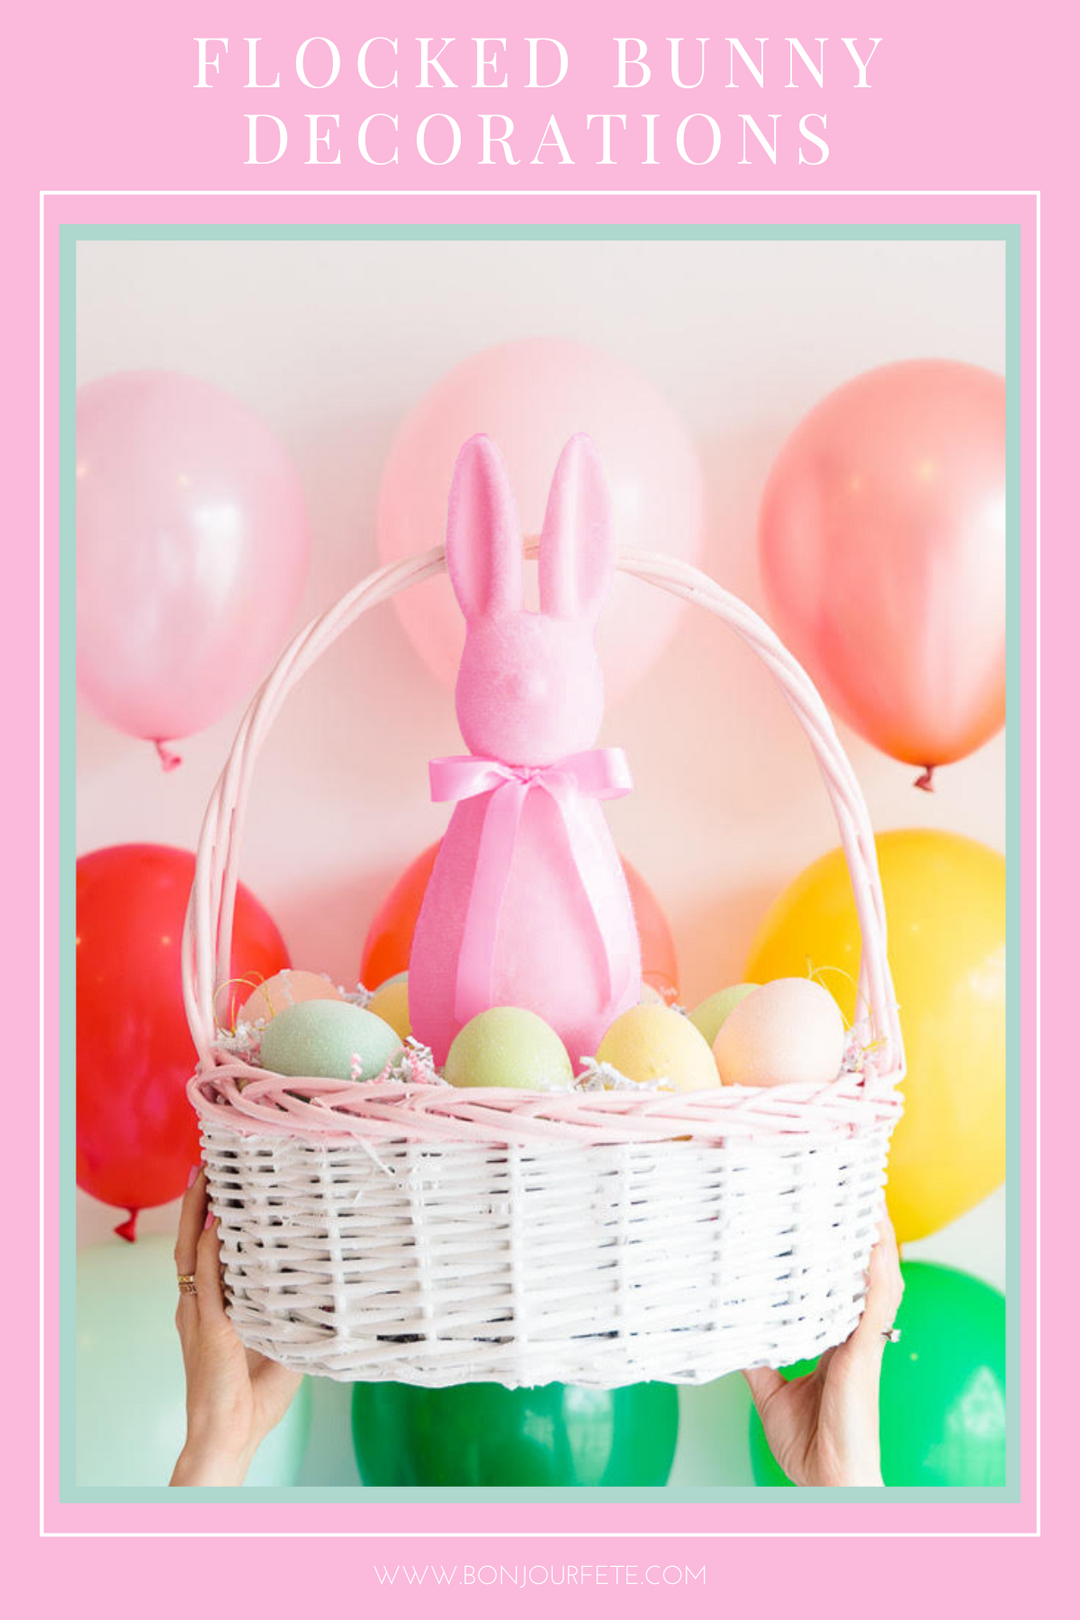 DECORATE FOR EASTER WITH FLOCKED EASTER BUNNIES